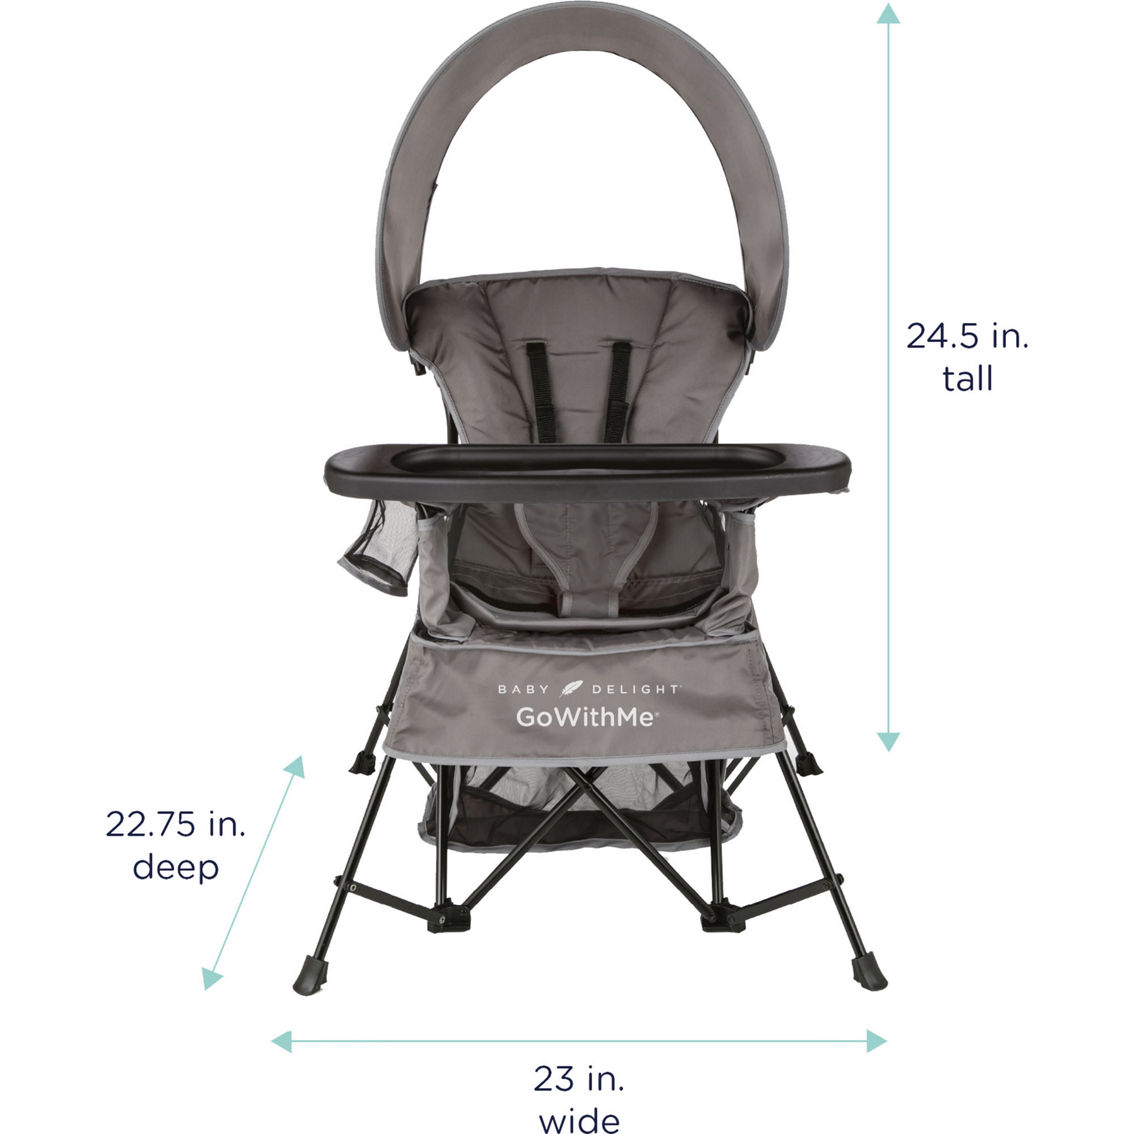 Baby Delight Go With Me Venture Deluxe Portable Chair - Image 3 of 3